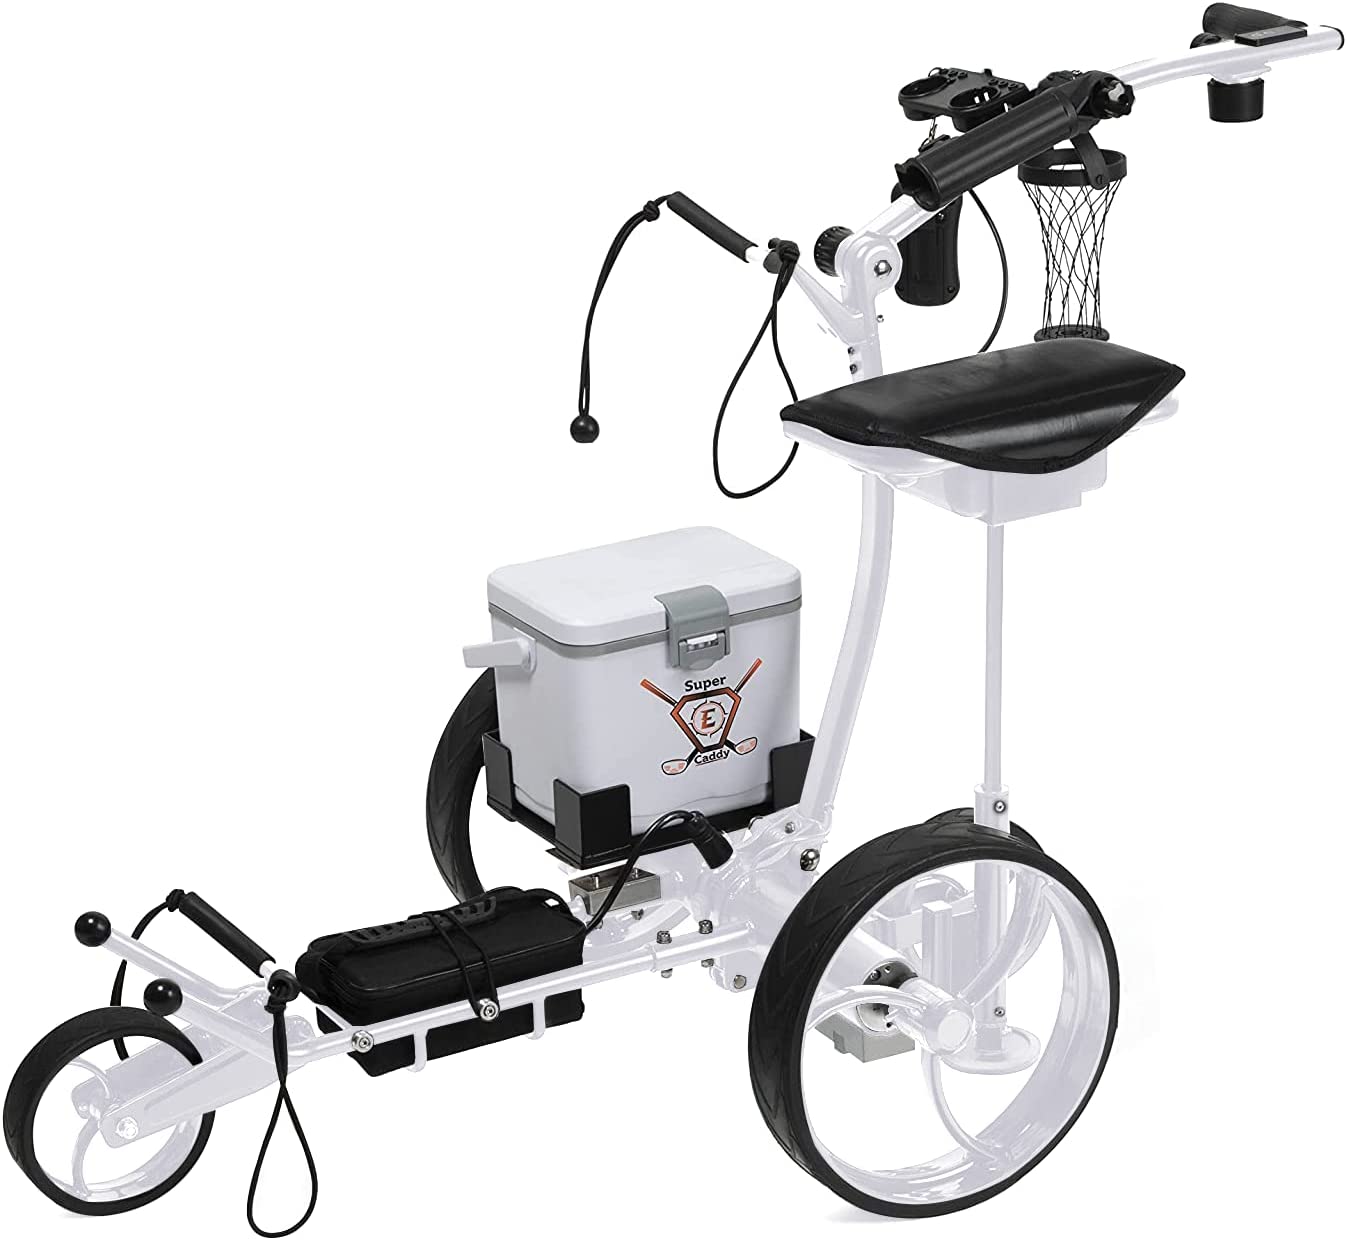 The PRO  Electric golf cart with remote and built in 6 pack cooler lasts 36 holes!! 2 years warranty